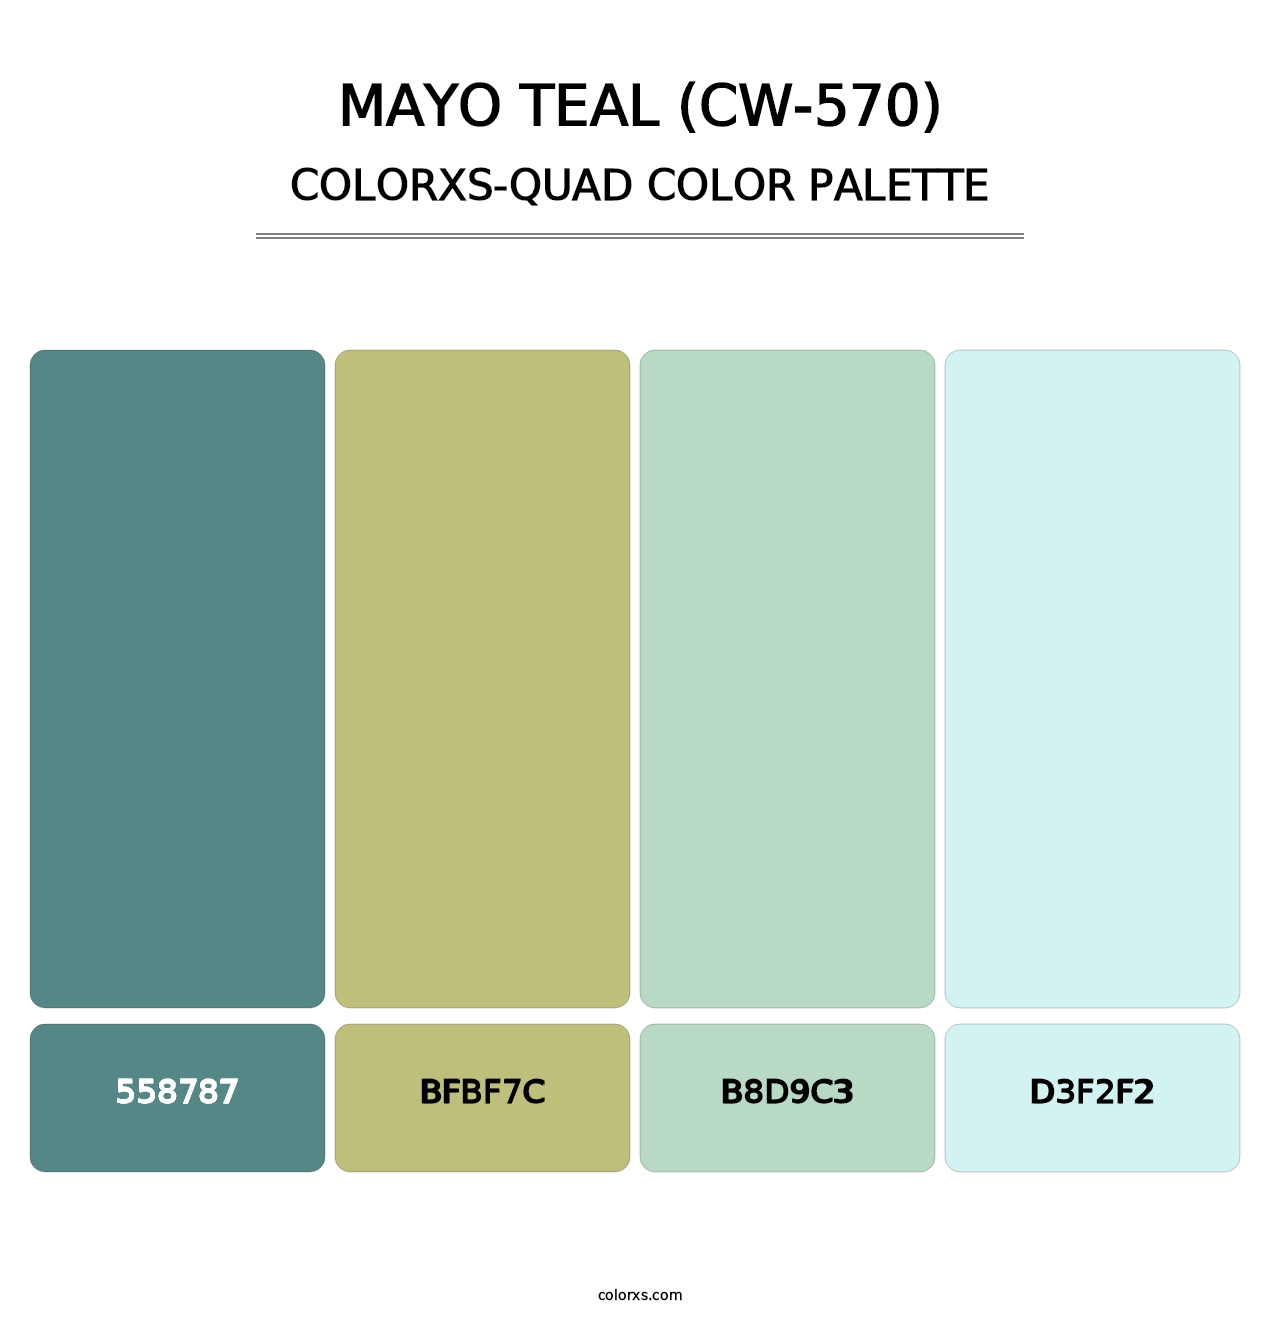 Mayo Teal (CW-570) - Colorxs Quad Palette